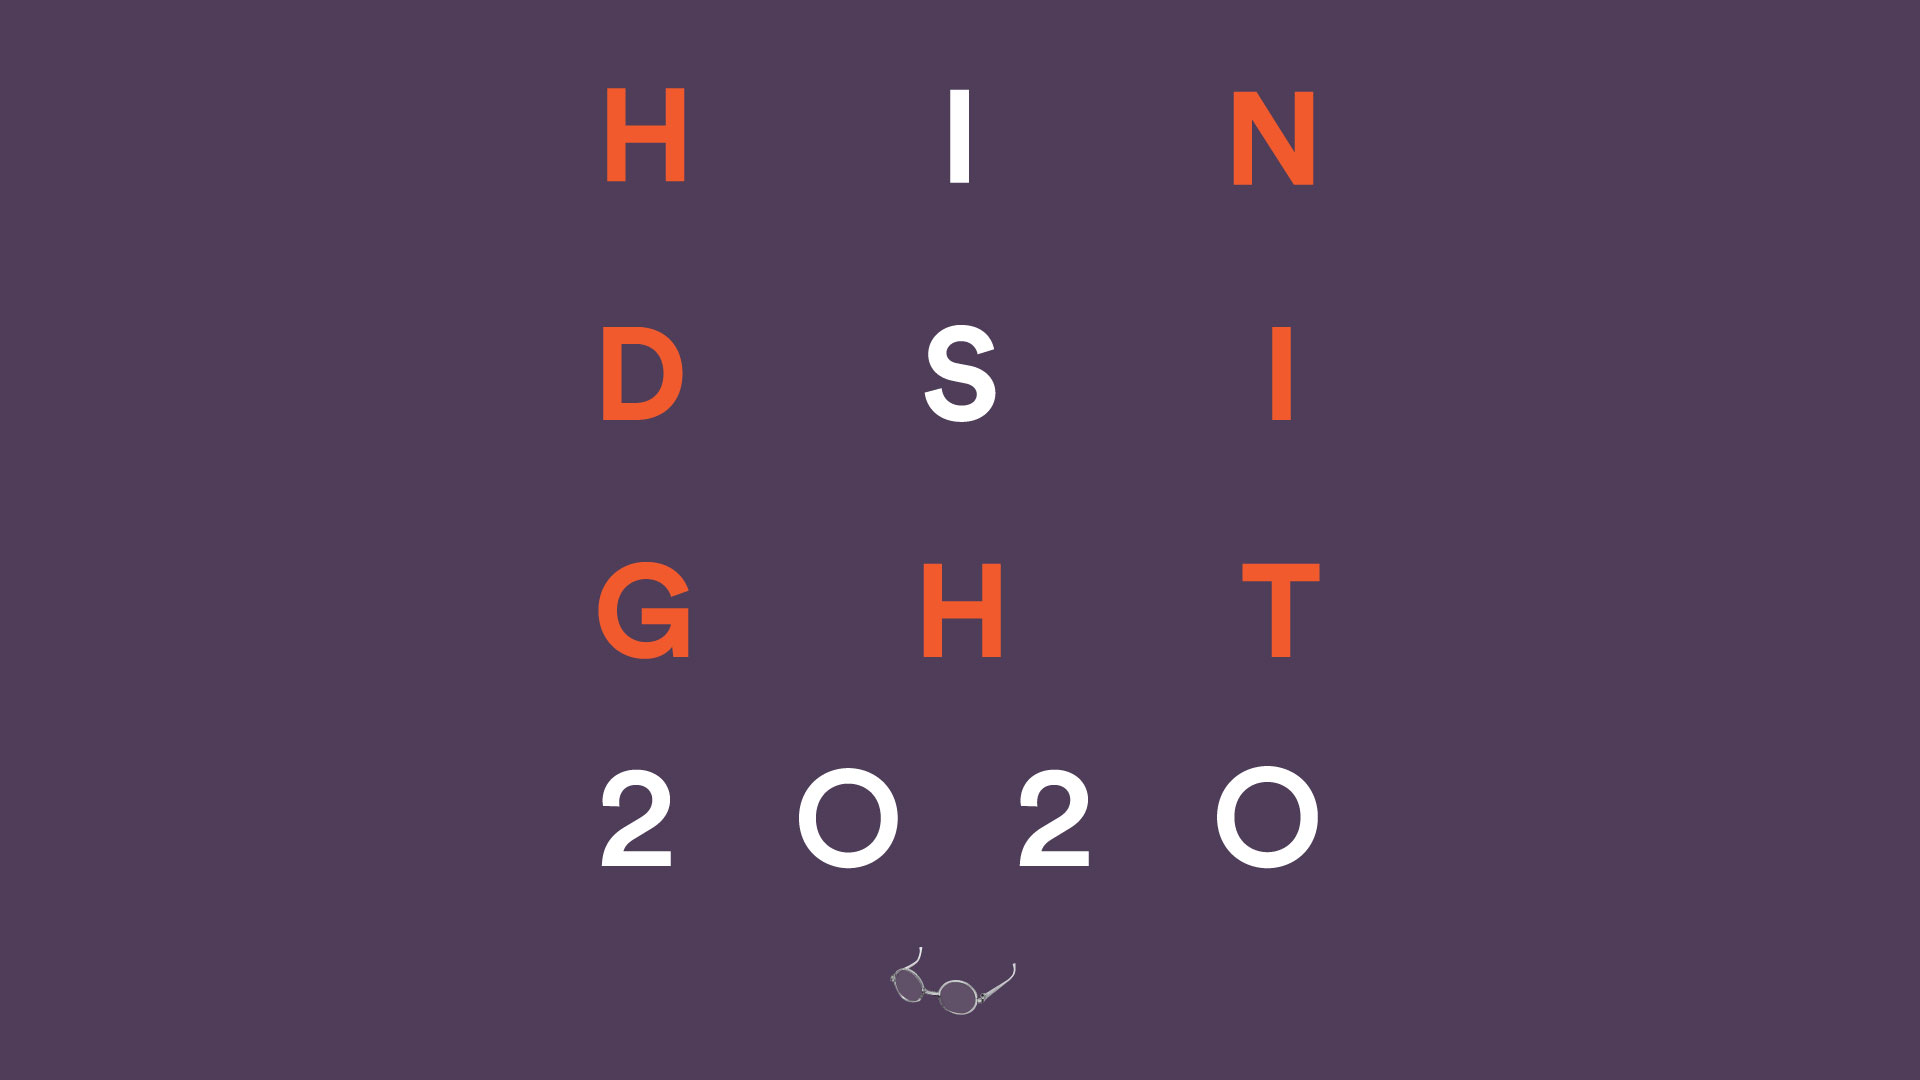 Hindsight 2020 (cancelled)